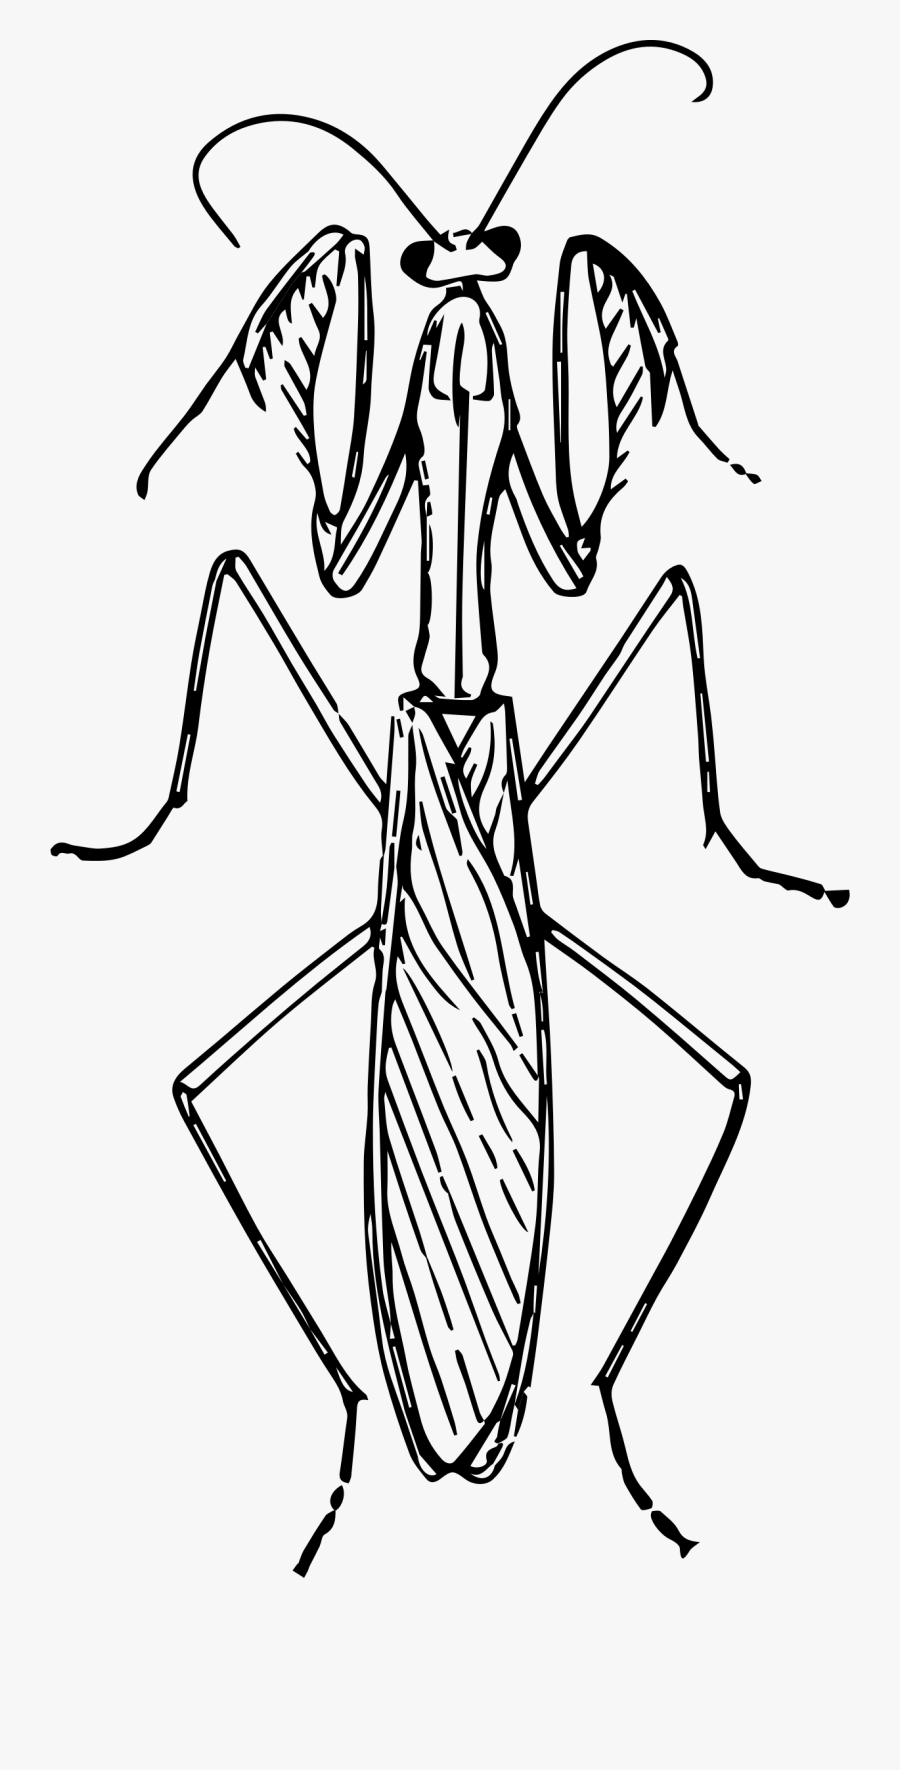 28 Collection Of Praying Mantis Clipart Black And White - Praying Mantis Black And White, Transparent Clipart